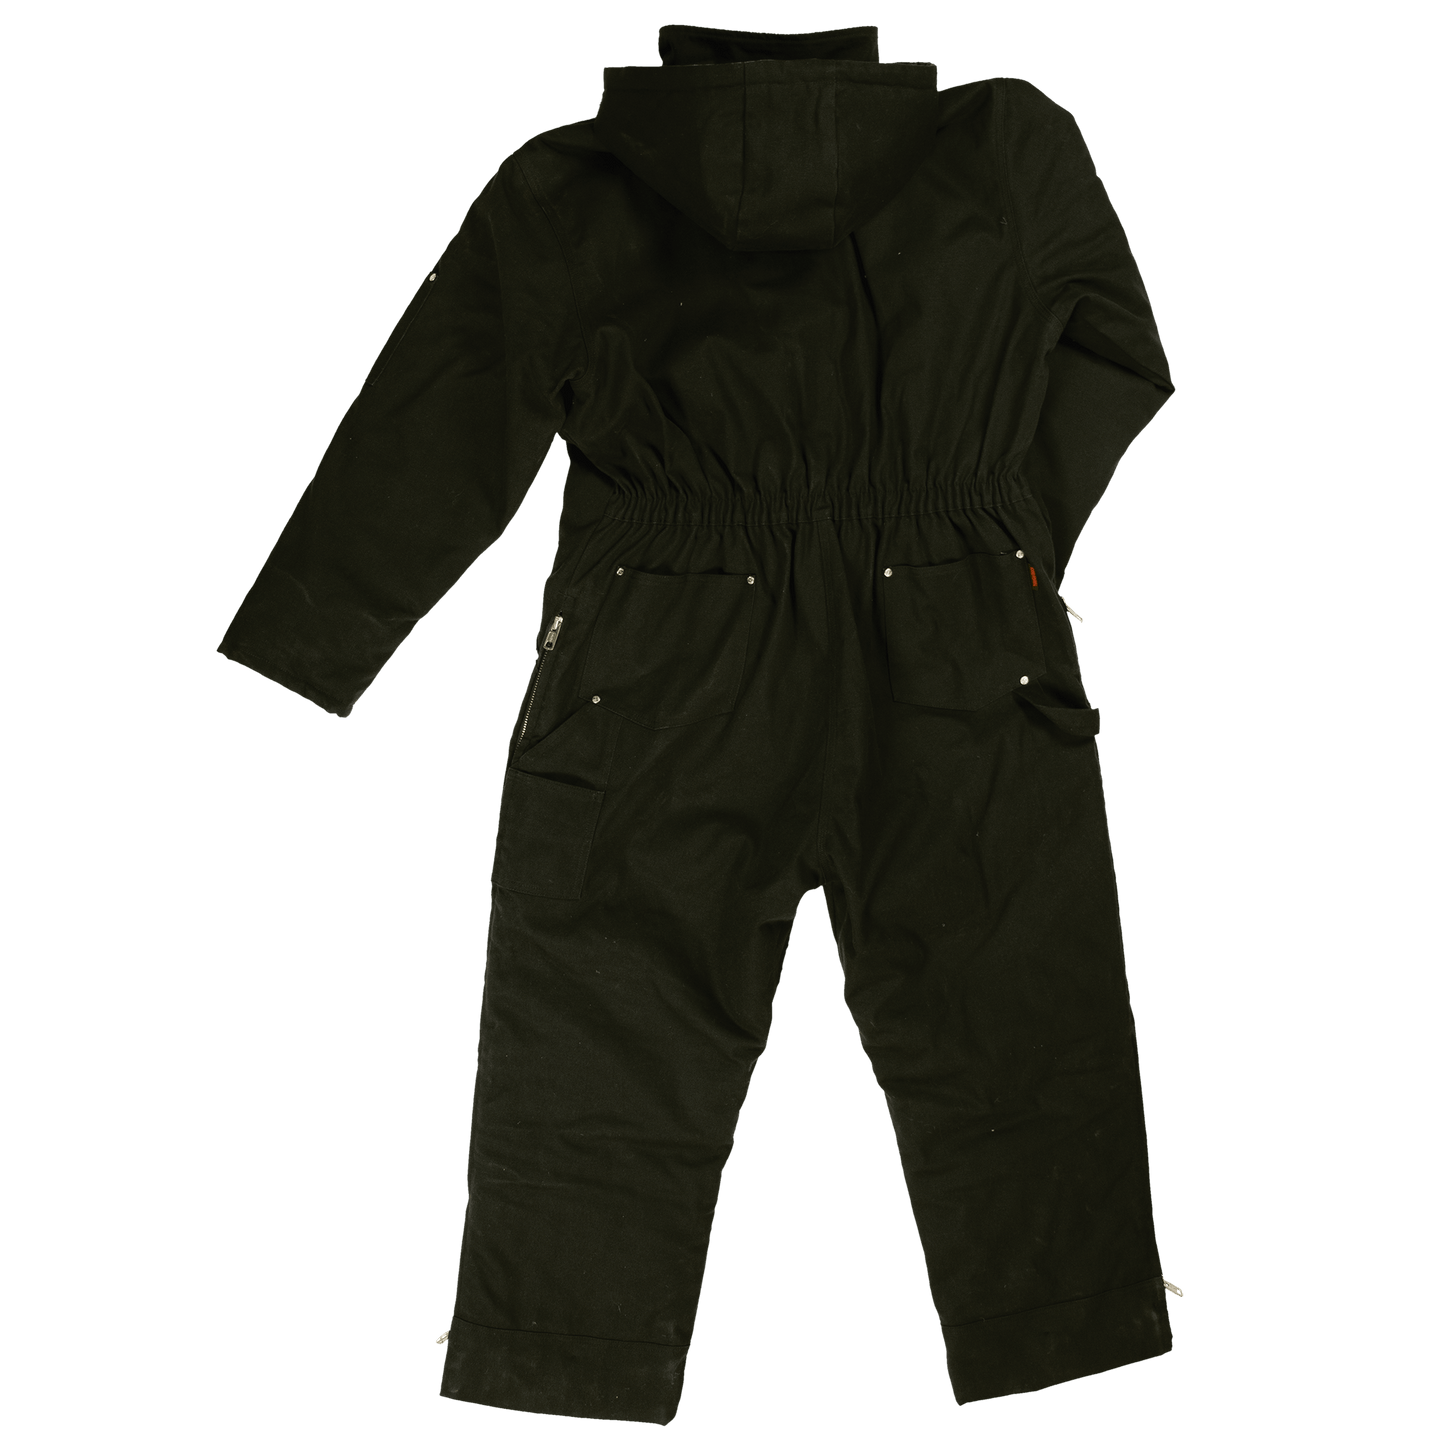 Insulated Duck Coverall WC01